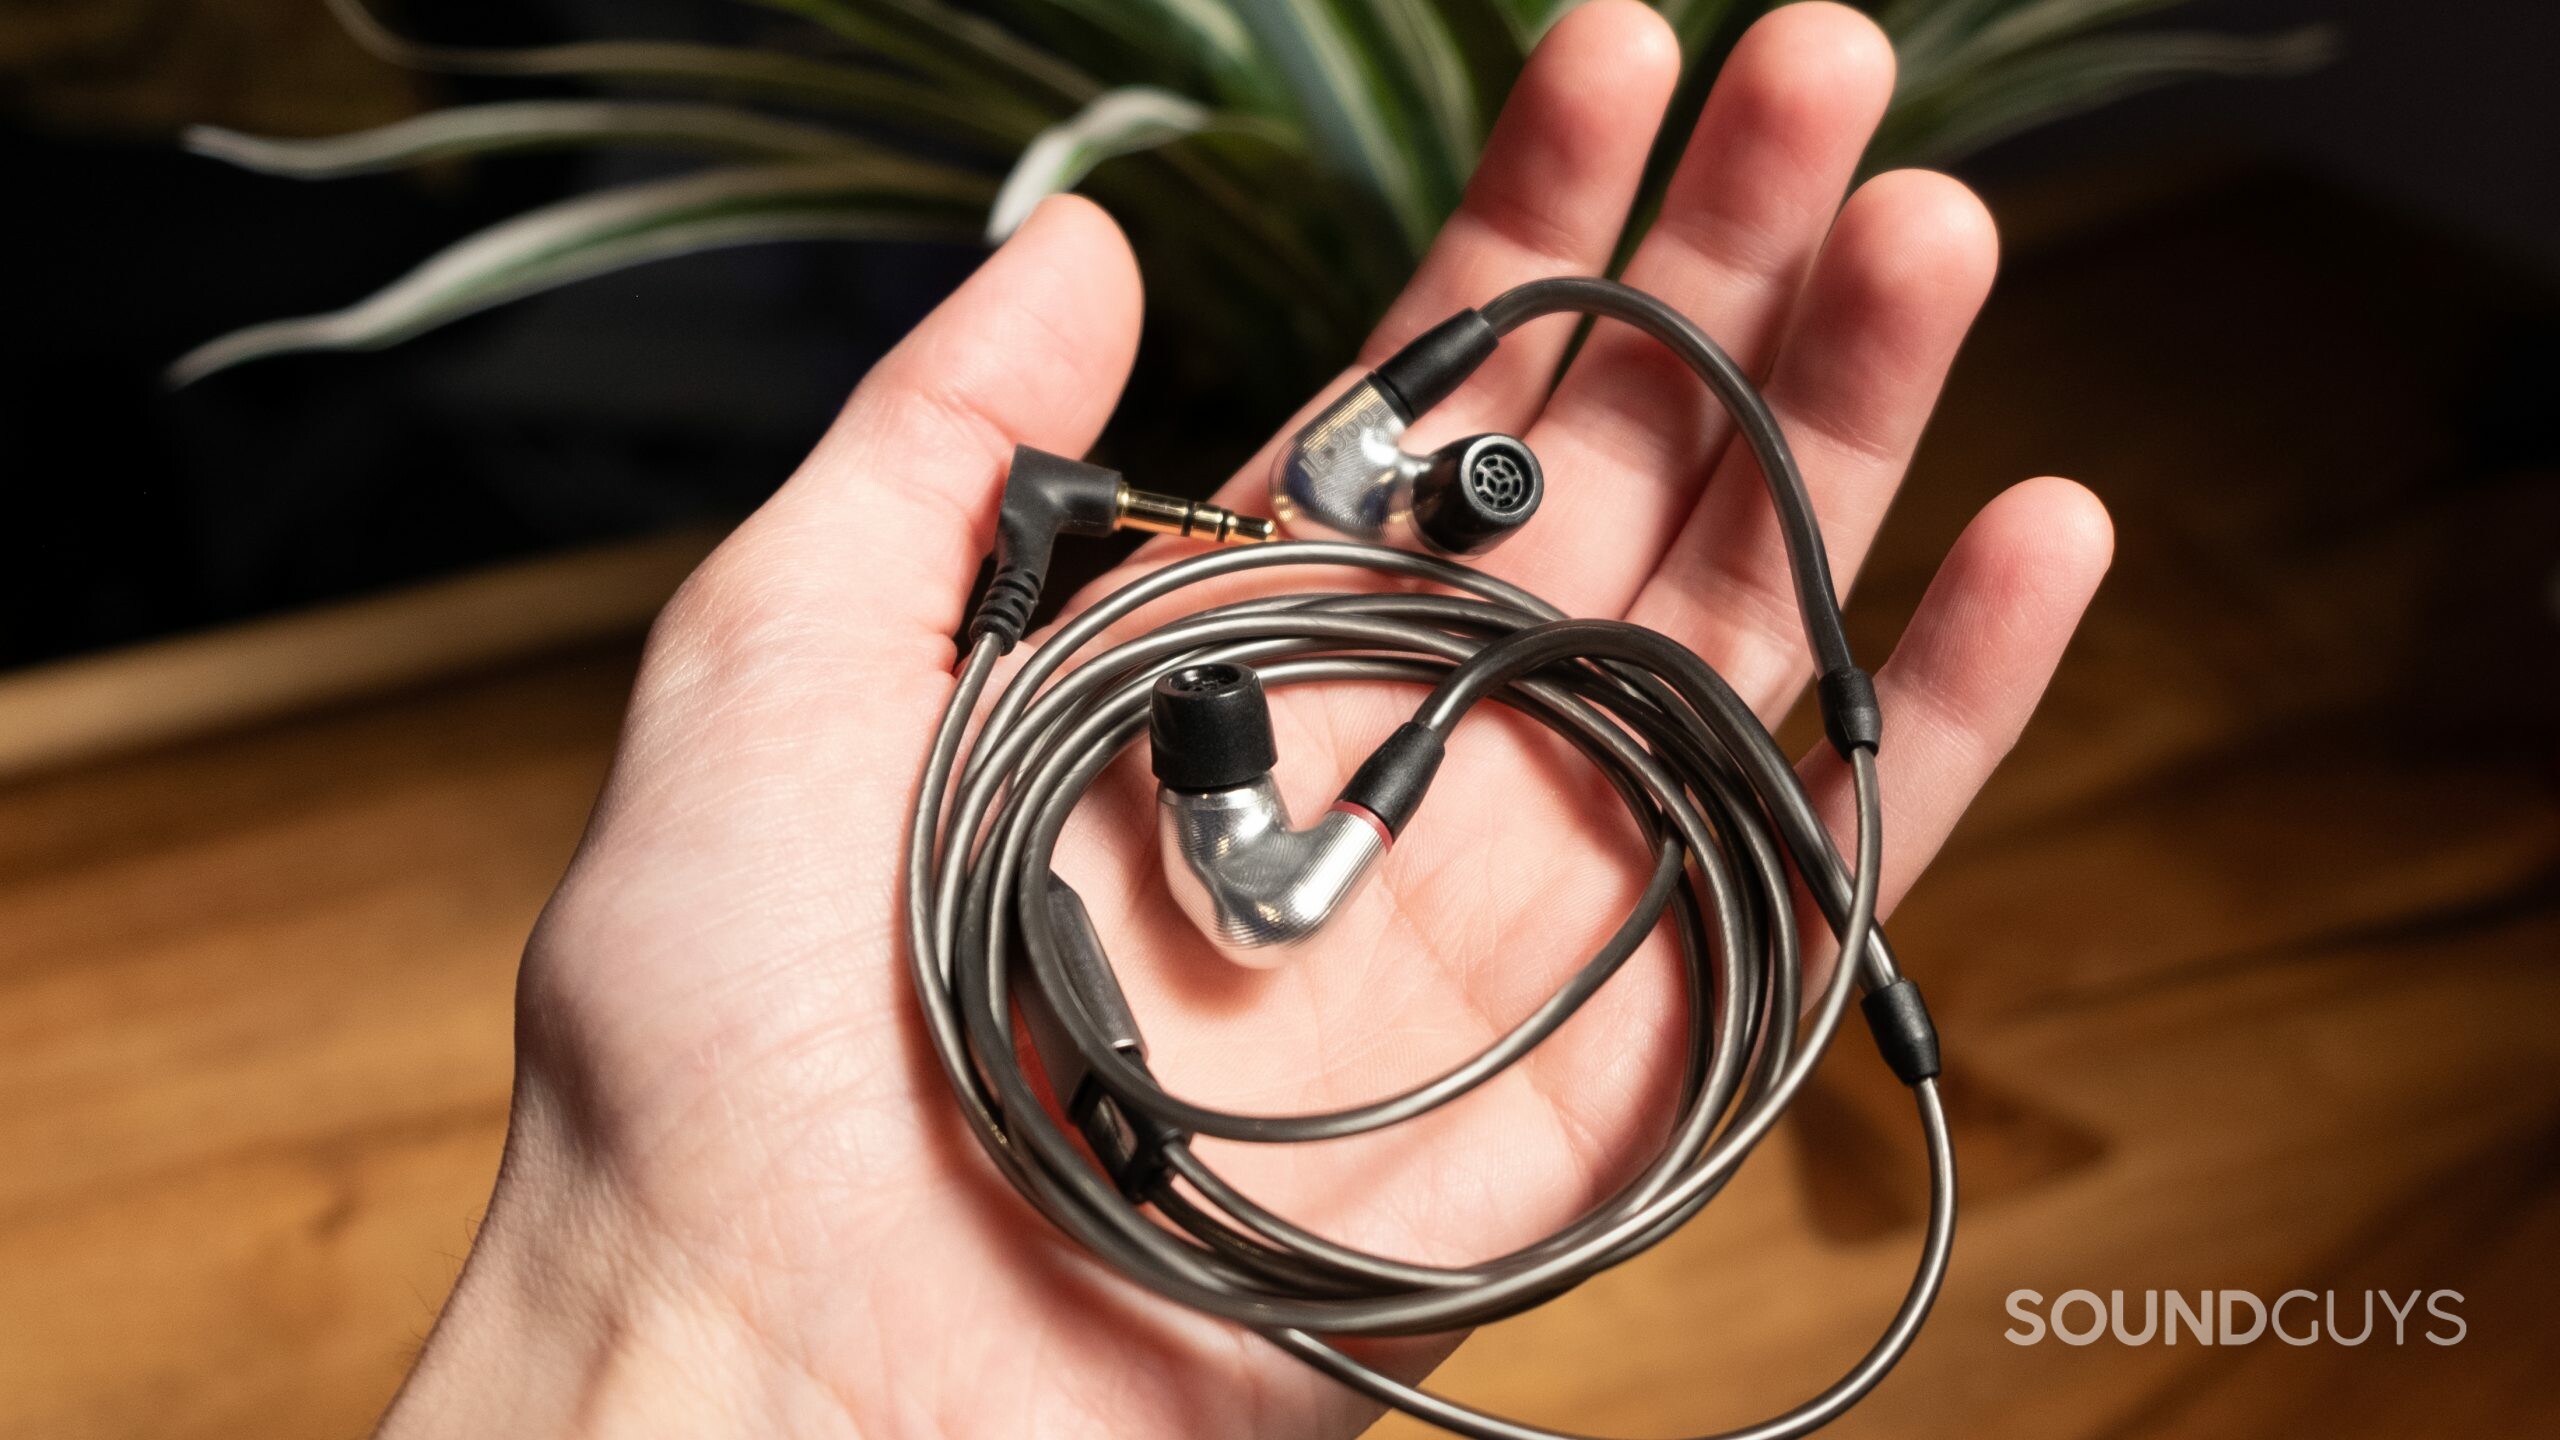 The Sennheiser IE 900 coiled up in a hand.